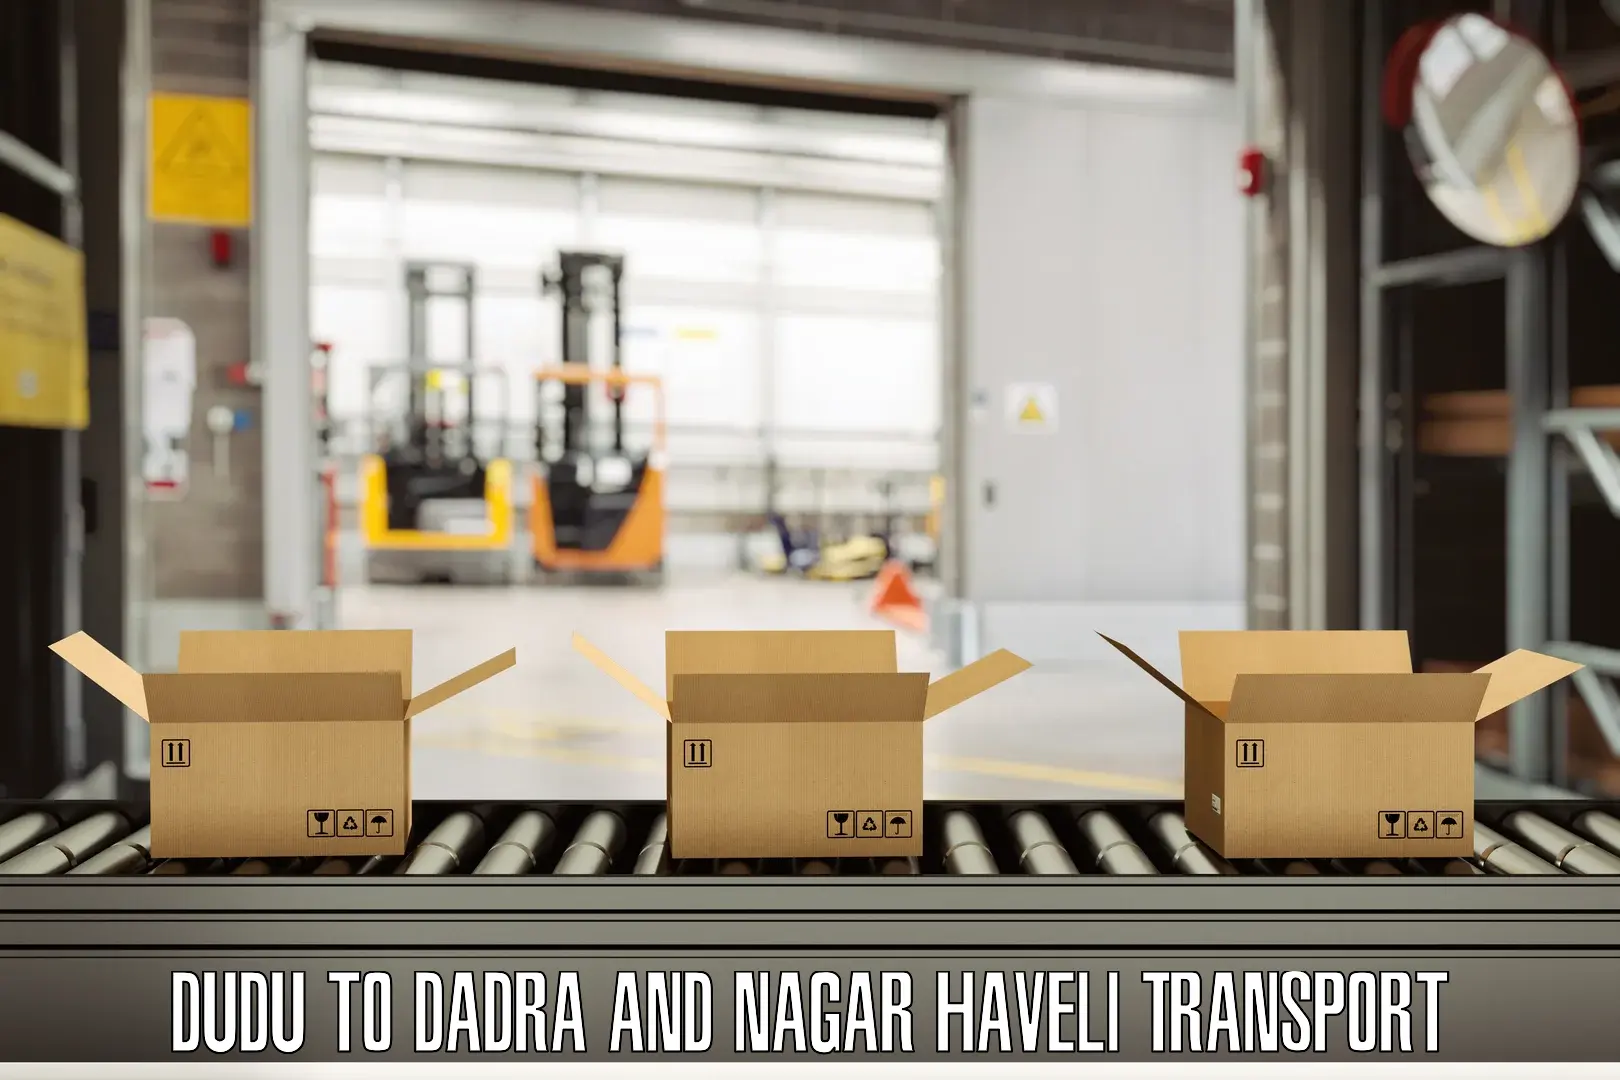 Commercial transport service Dudu to Dadra and Nagar Haveli